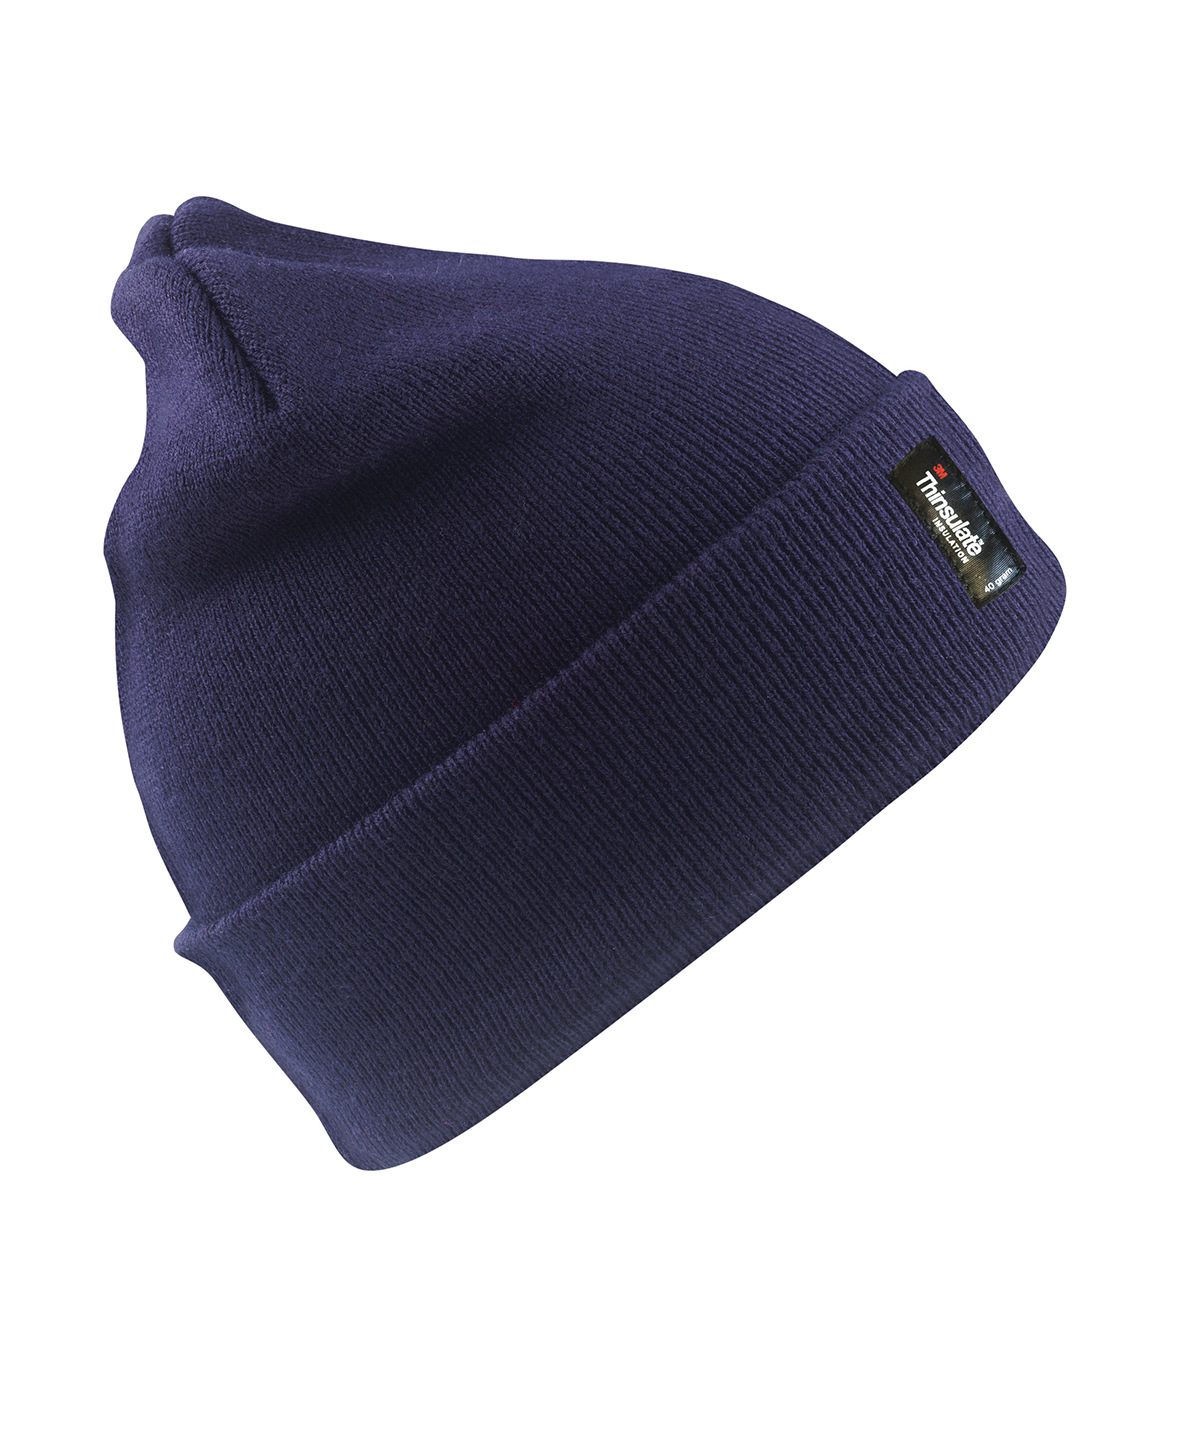 Heavyweight Thinsulate Hat in navy with knitted double thickness